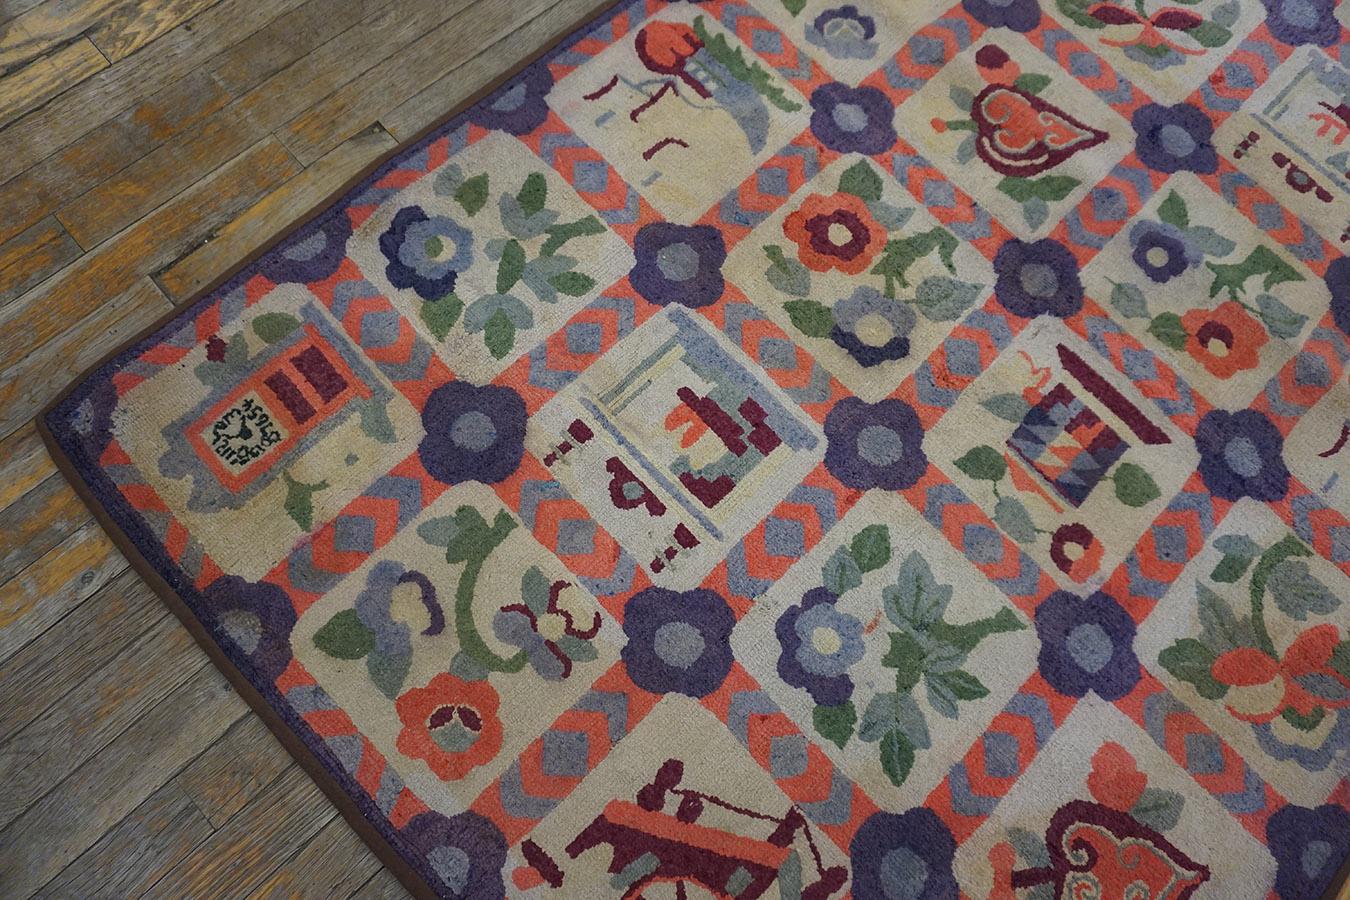 Early 20th Century American Hooked Rug ( 3'9'' x 5'7'' - 114 x 170 ) In Good Condition For Sale In New York, NY